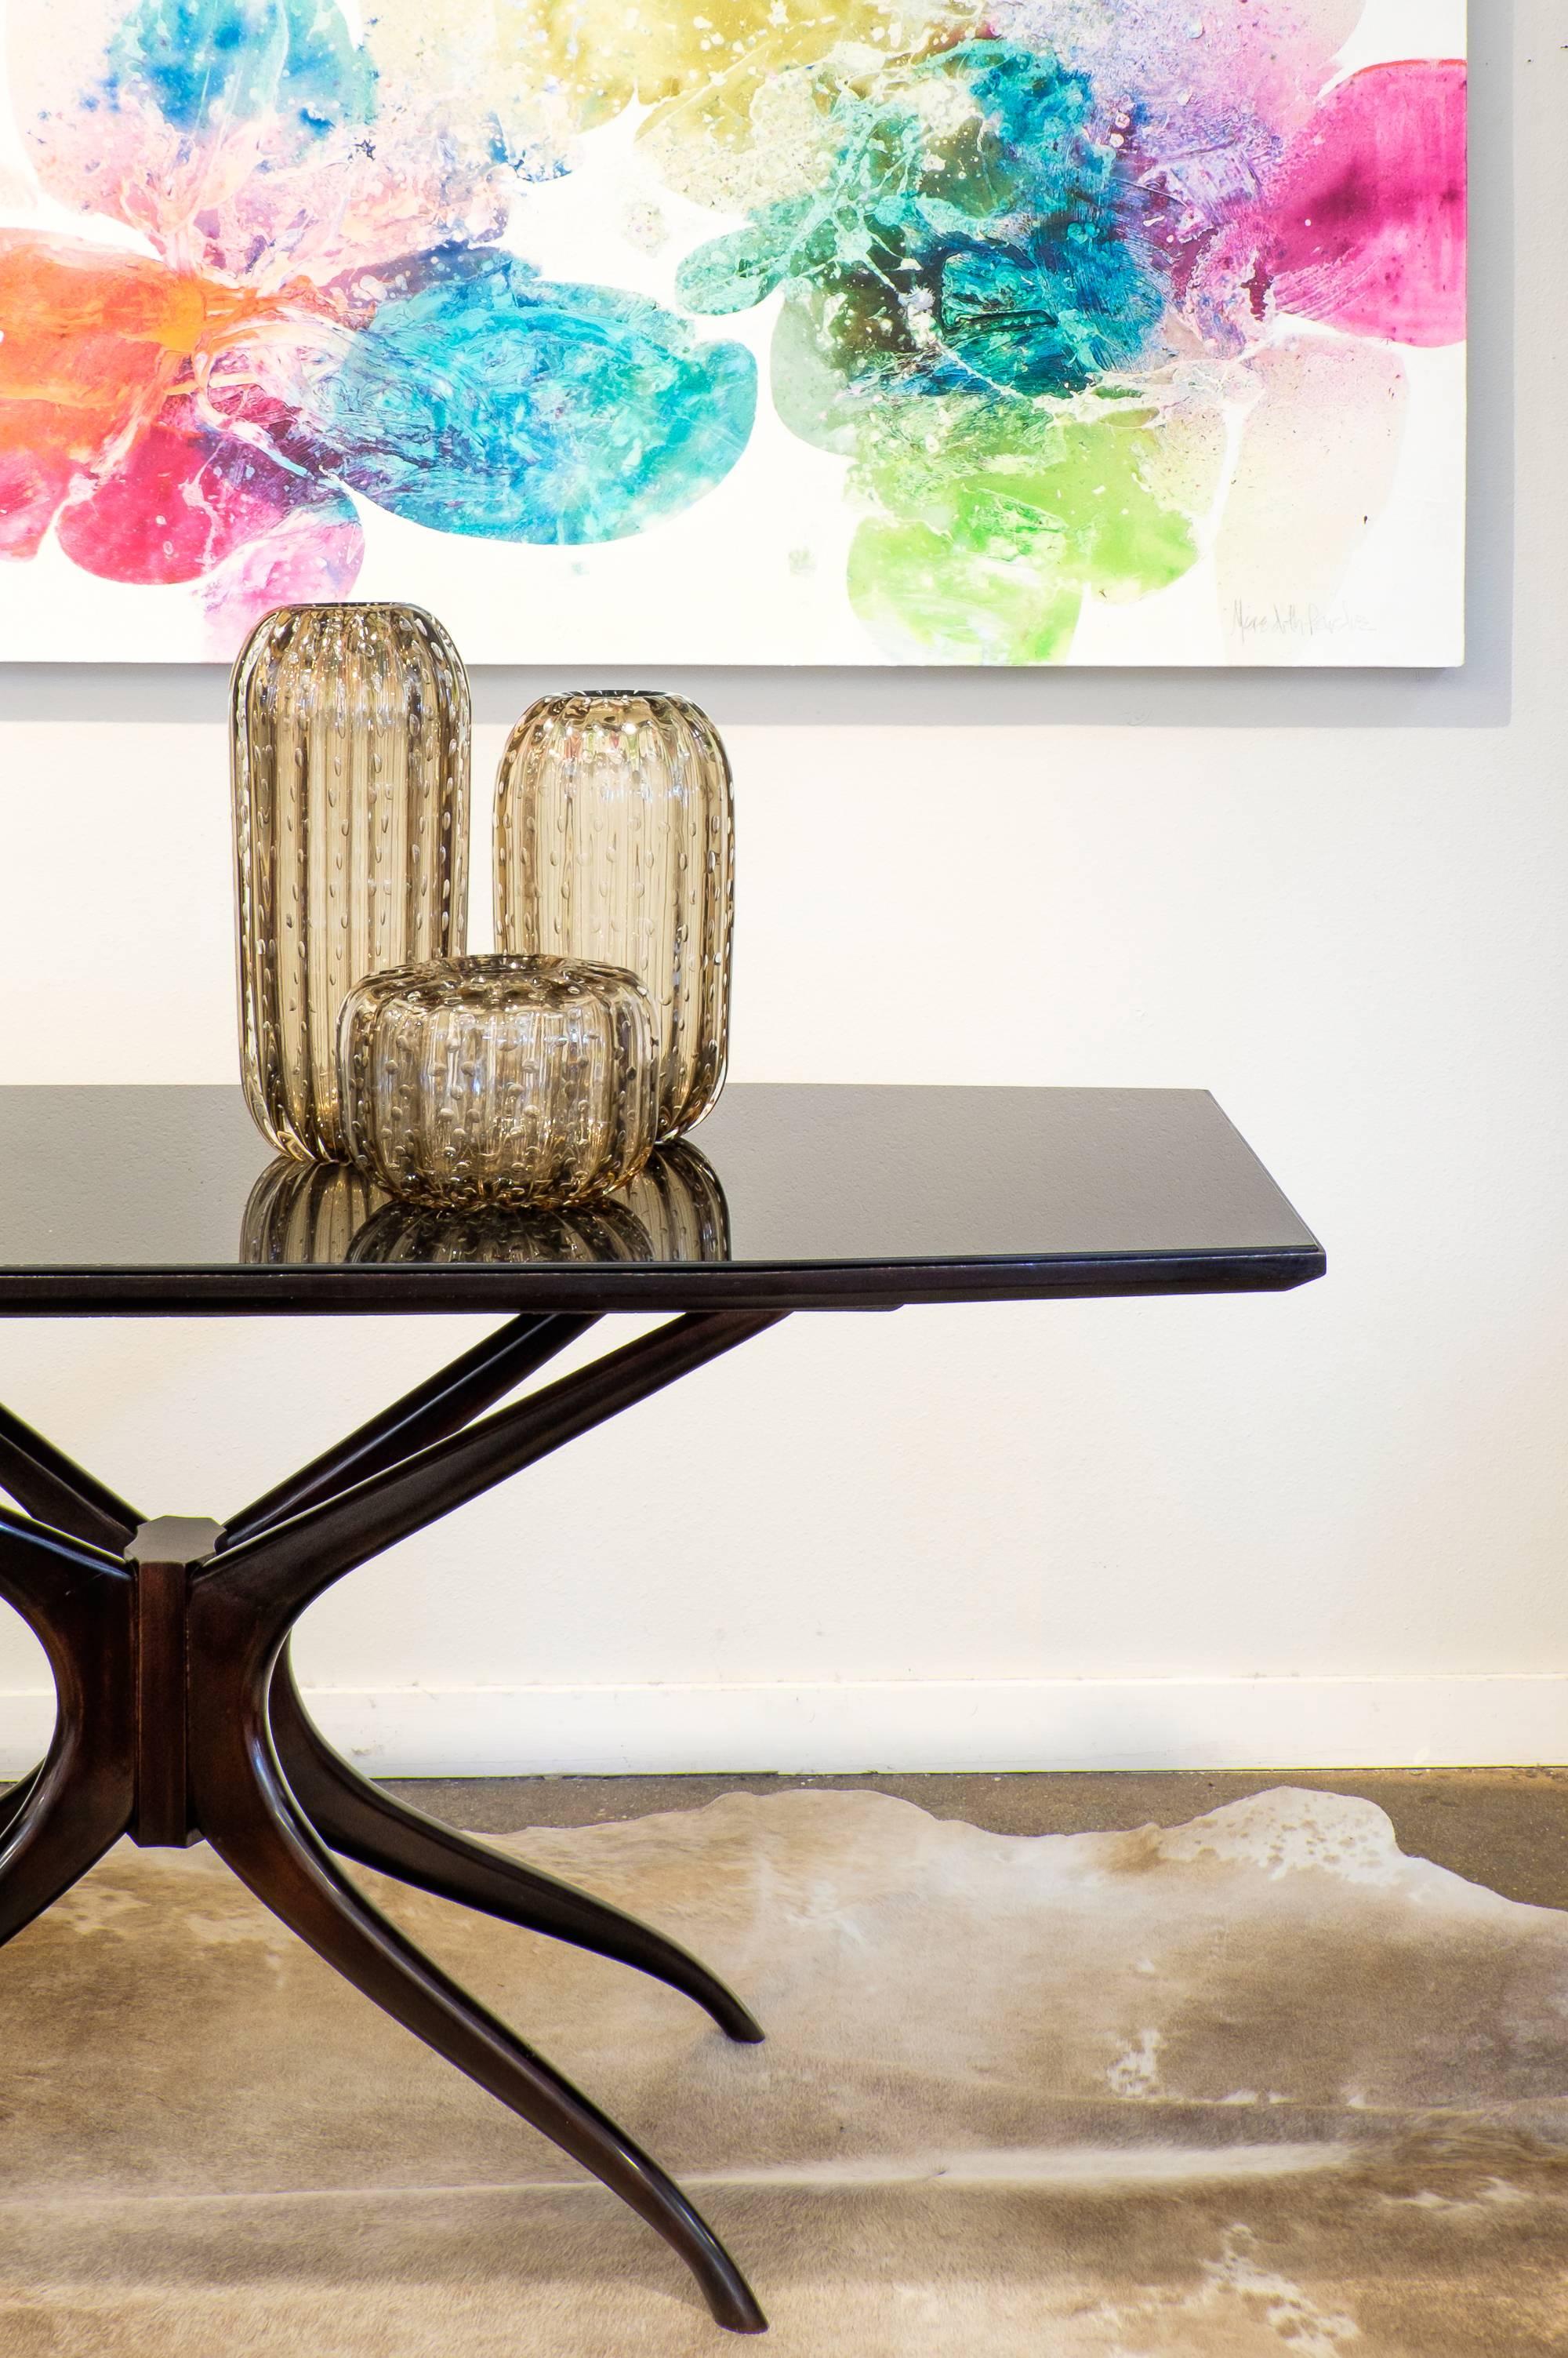 A captivating and sleek Italian midcentury table in the manner of Ico Parisi. This rich and gorgeous rosewood piece has a cobalt glass top supported by sculptural organic polished legs. A modern centerpiece from Italy that elevates any room it is